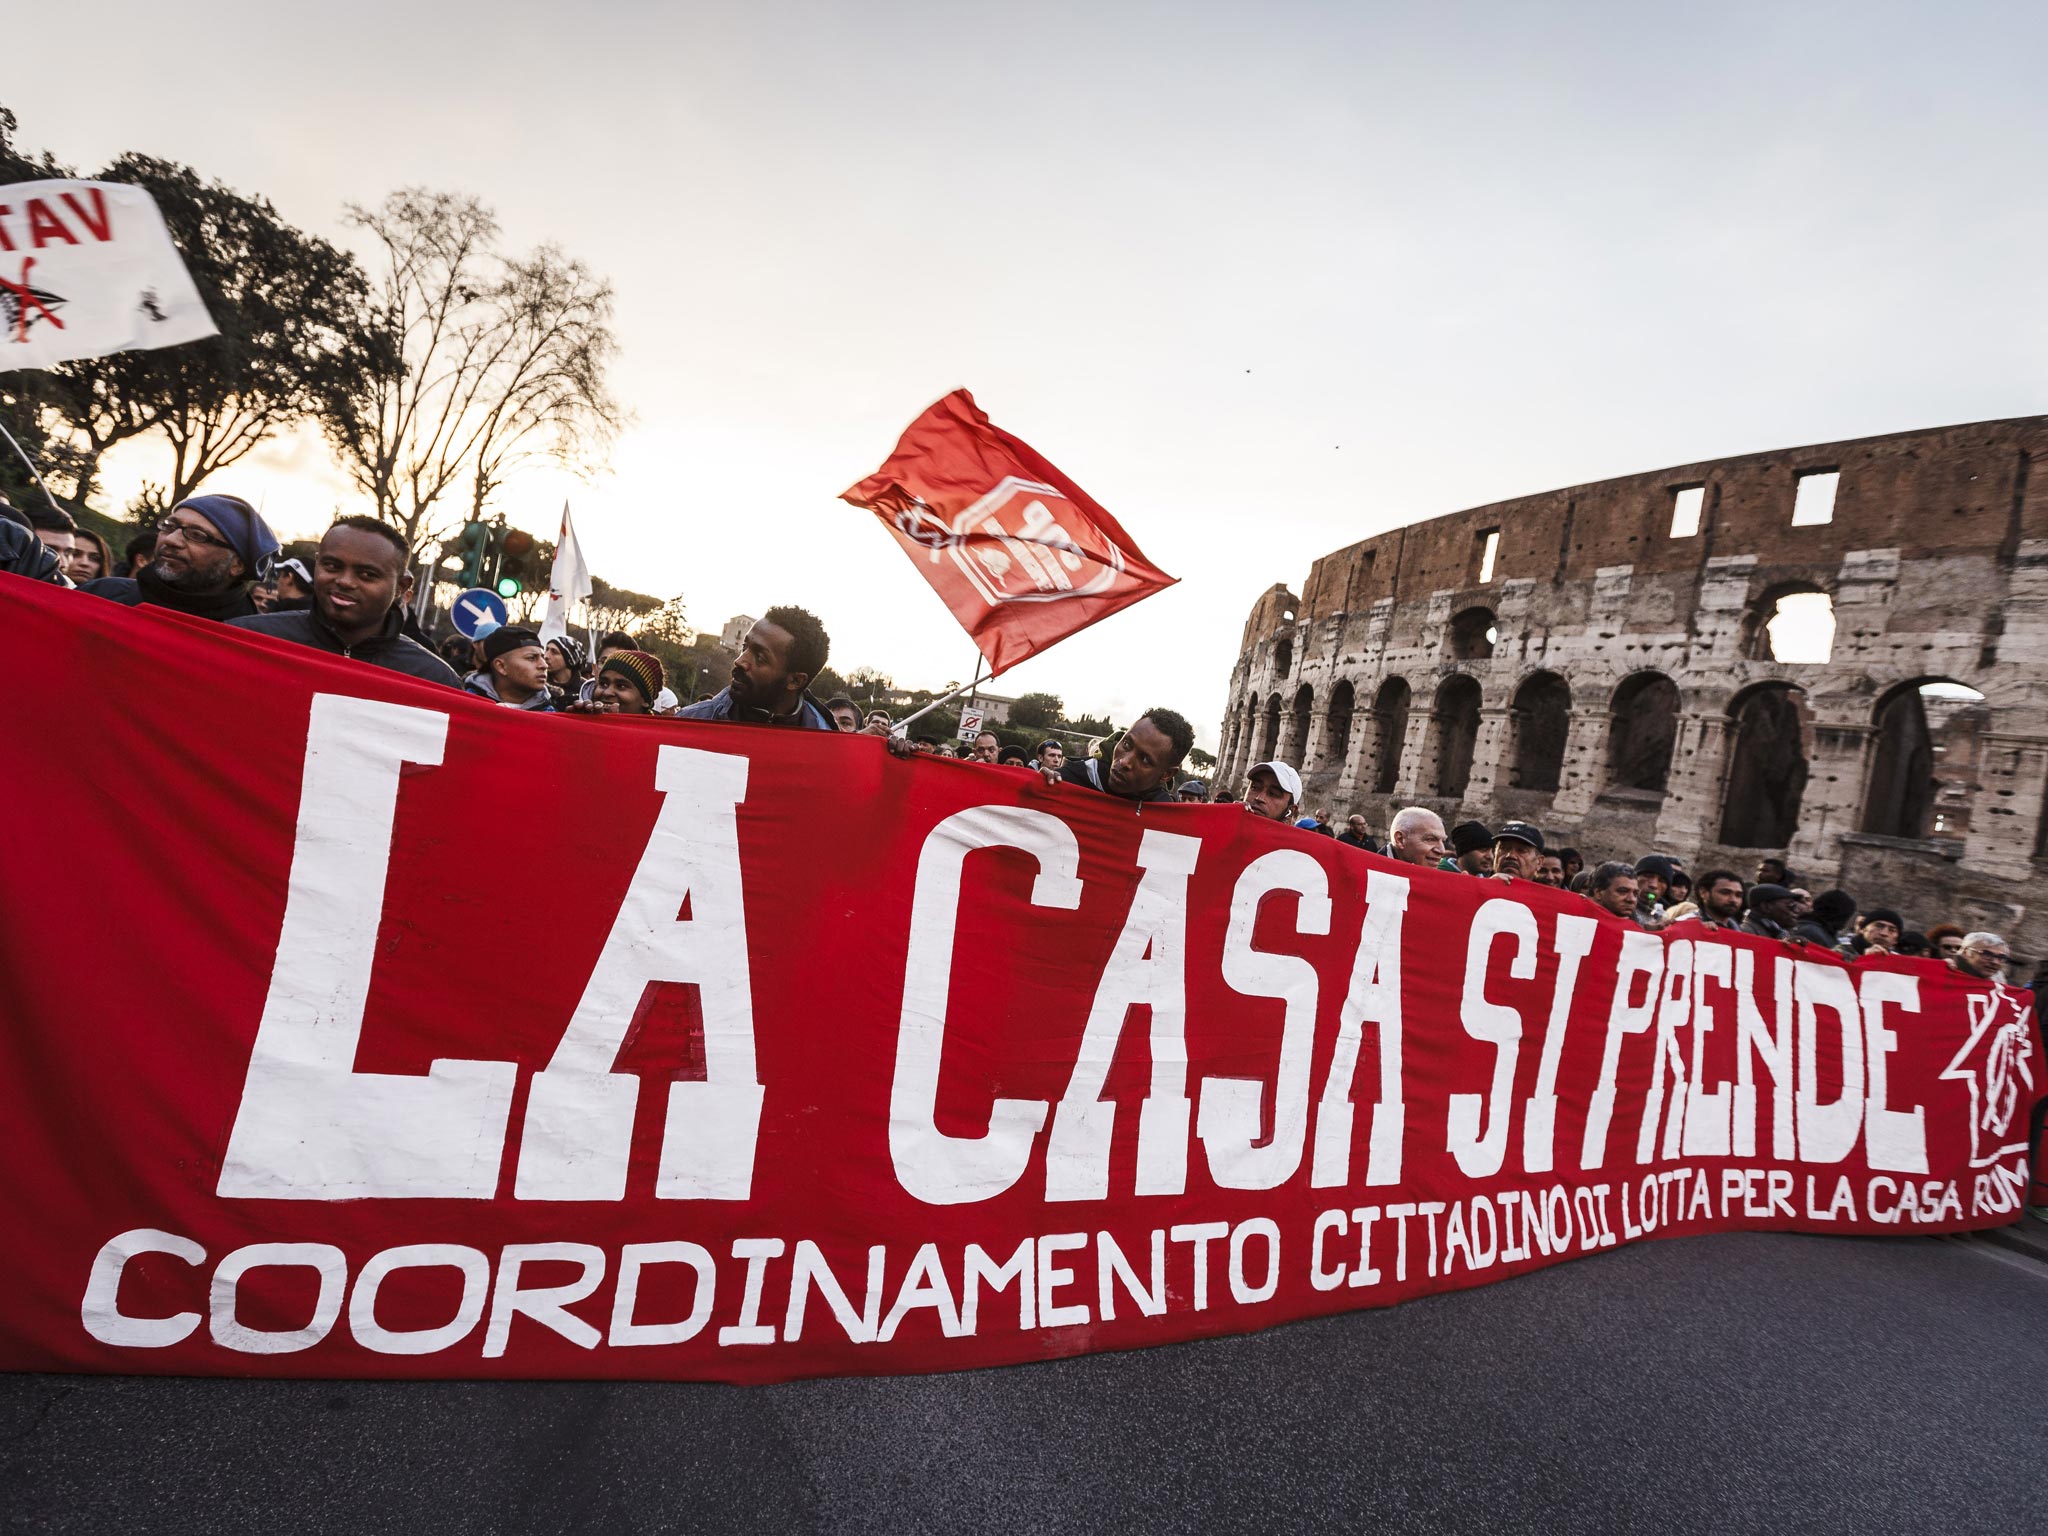 Activists from the movement ‘Housing Rights’ demonstrate in Rome for better housing conditions